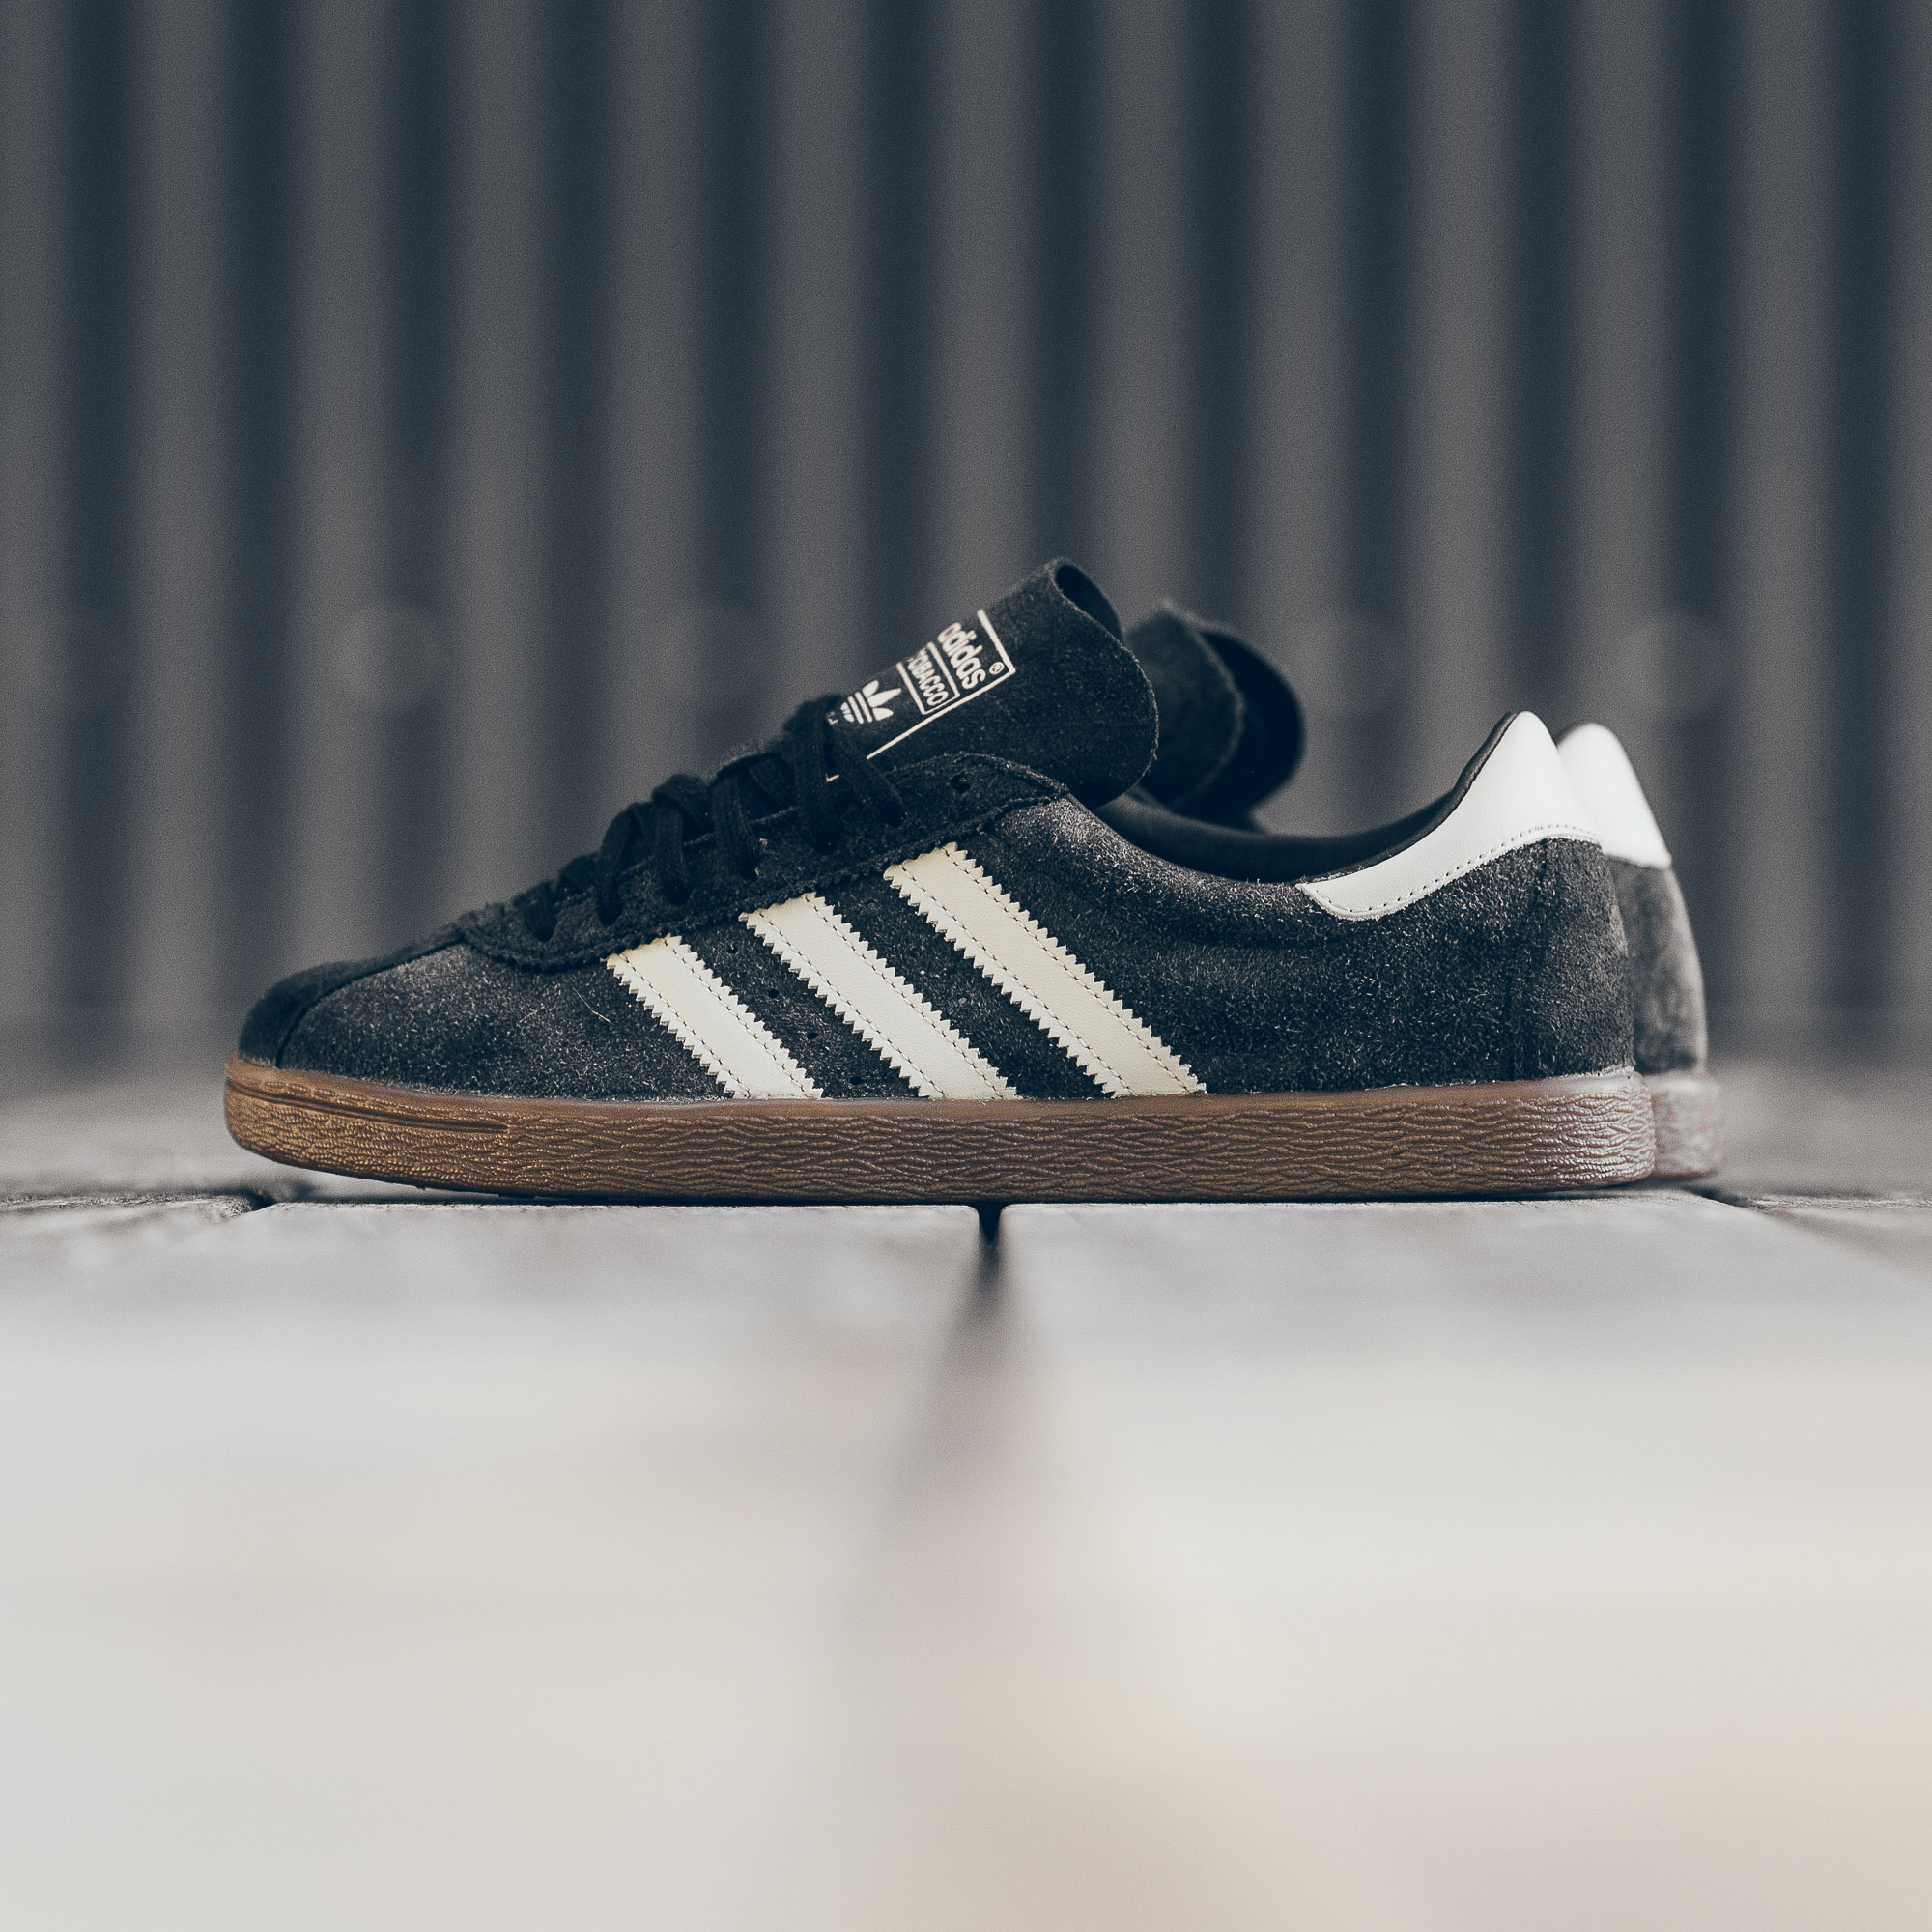 Adidas Tobacco Black/Brown Gum // Available Now